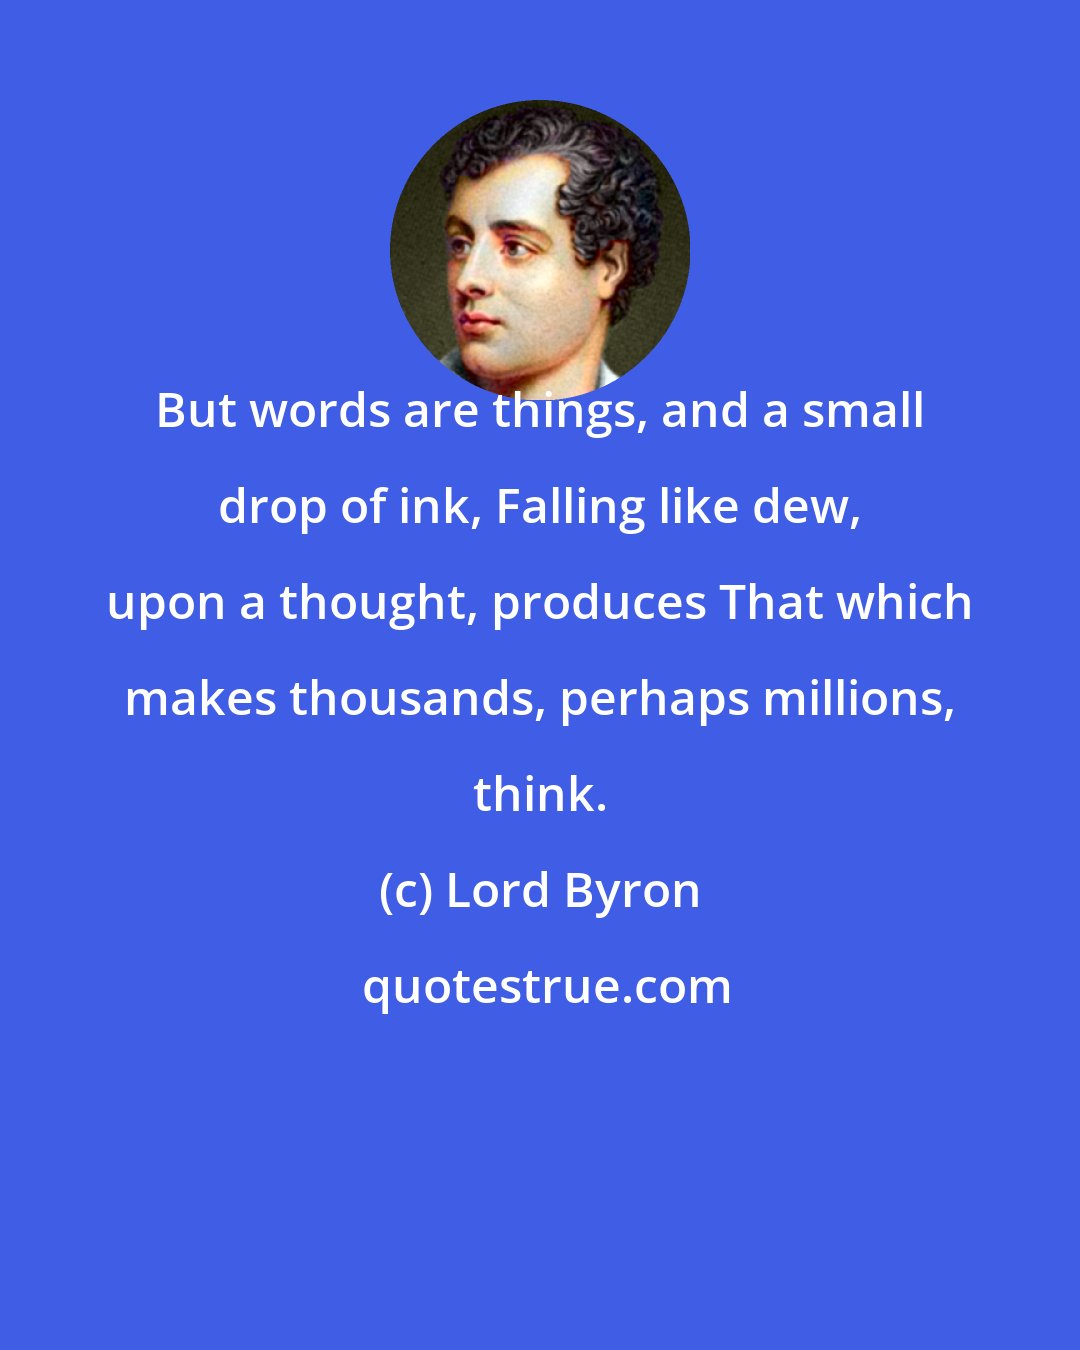 Lord Byron: But words are things, and a small drop of ink, Falling like dew, upon a thought, produces That which makes thousands, perhaps millions, think.